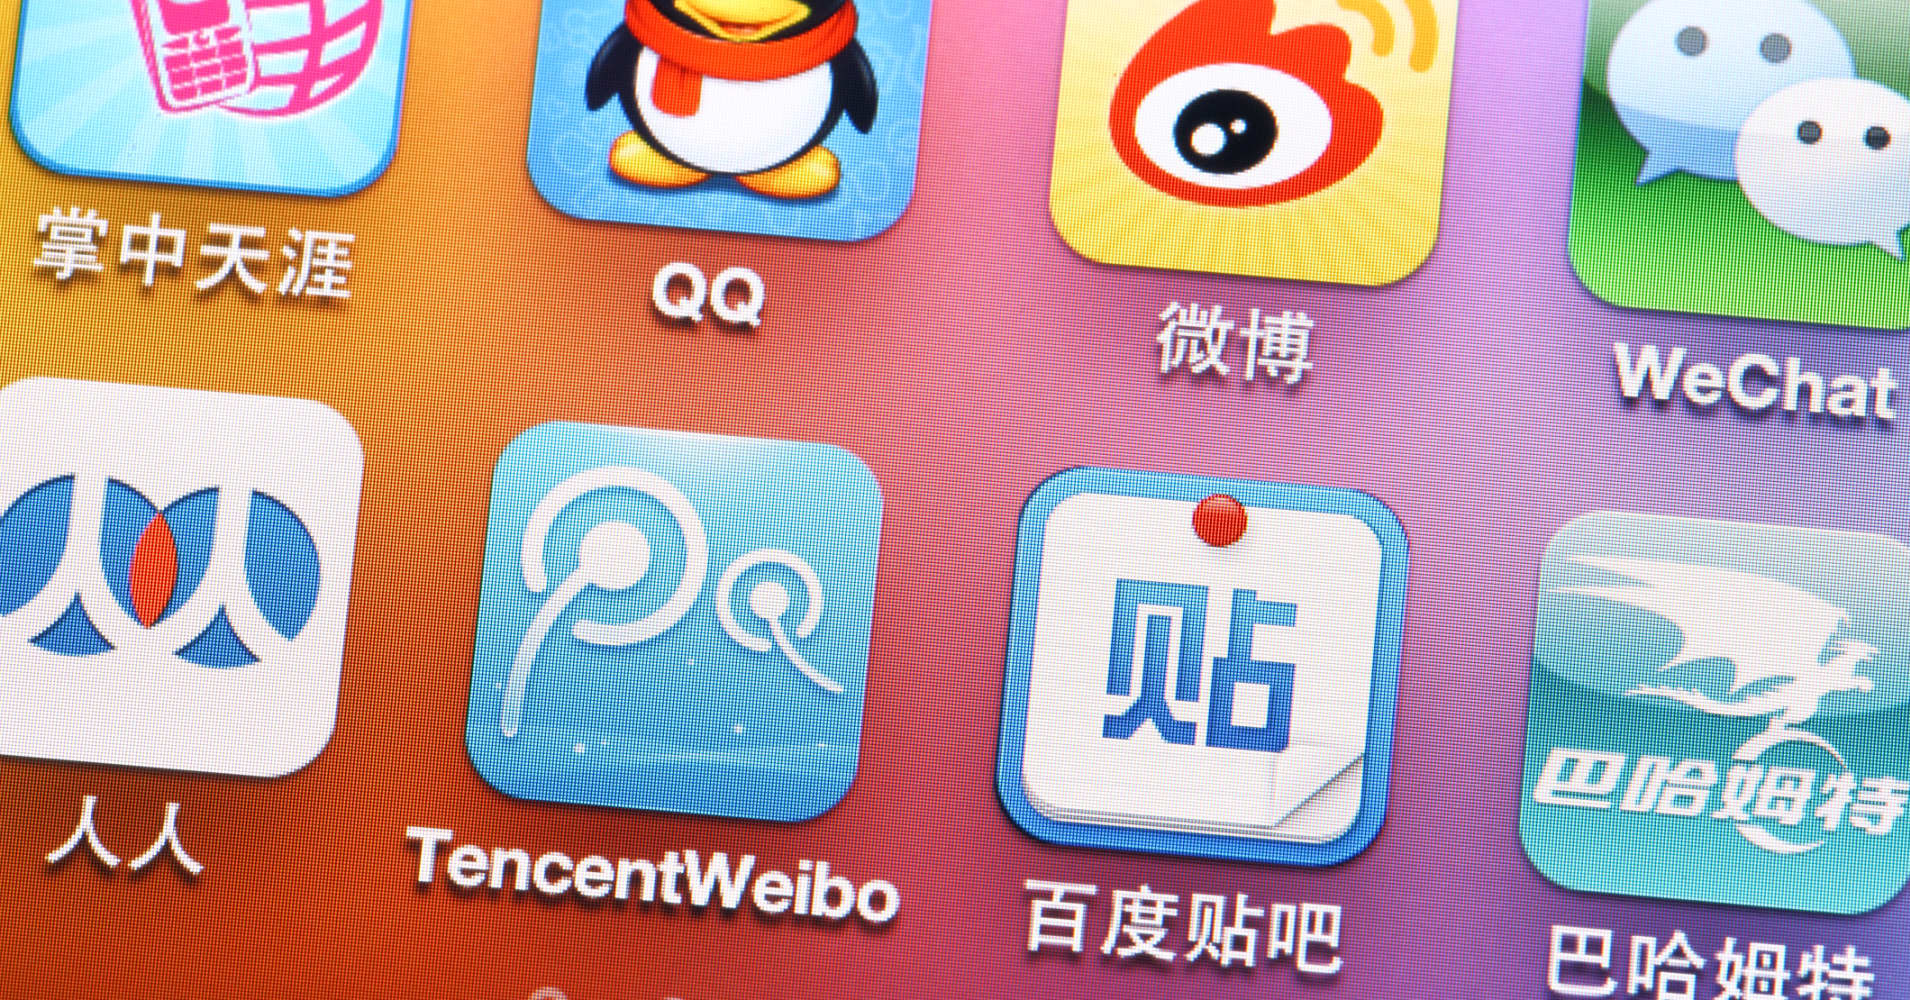 Here's why Tencent remains a top buy in China's internet space - CNBC